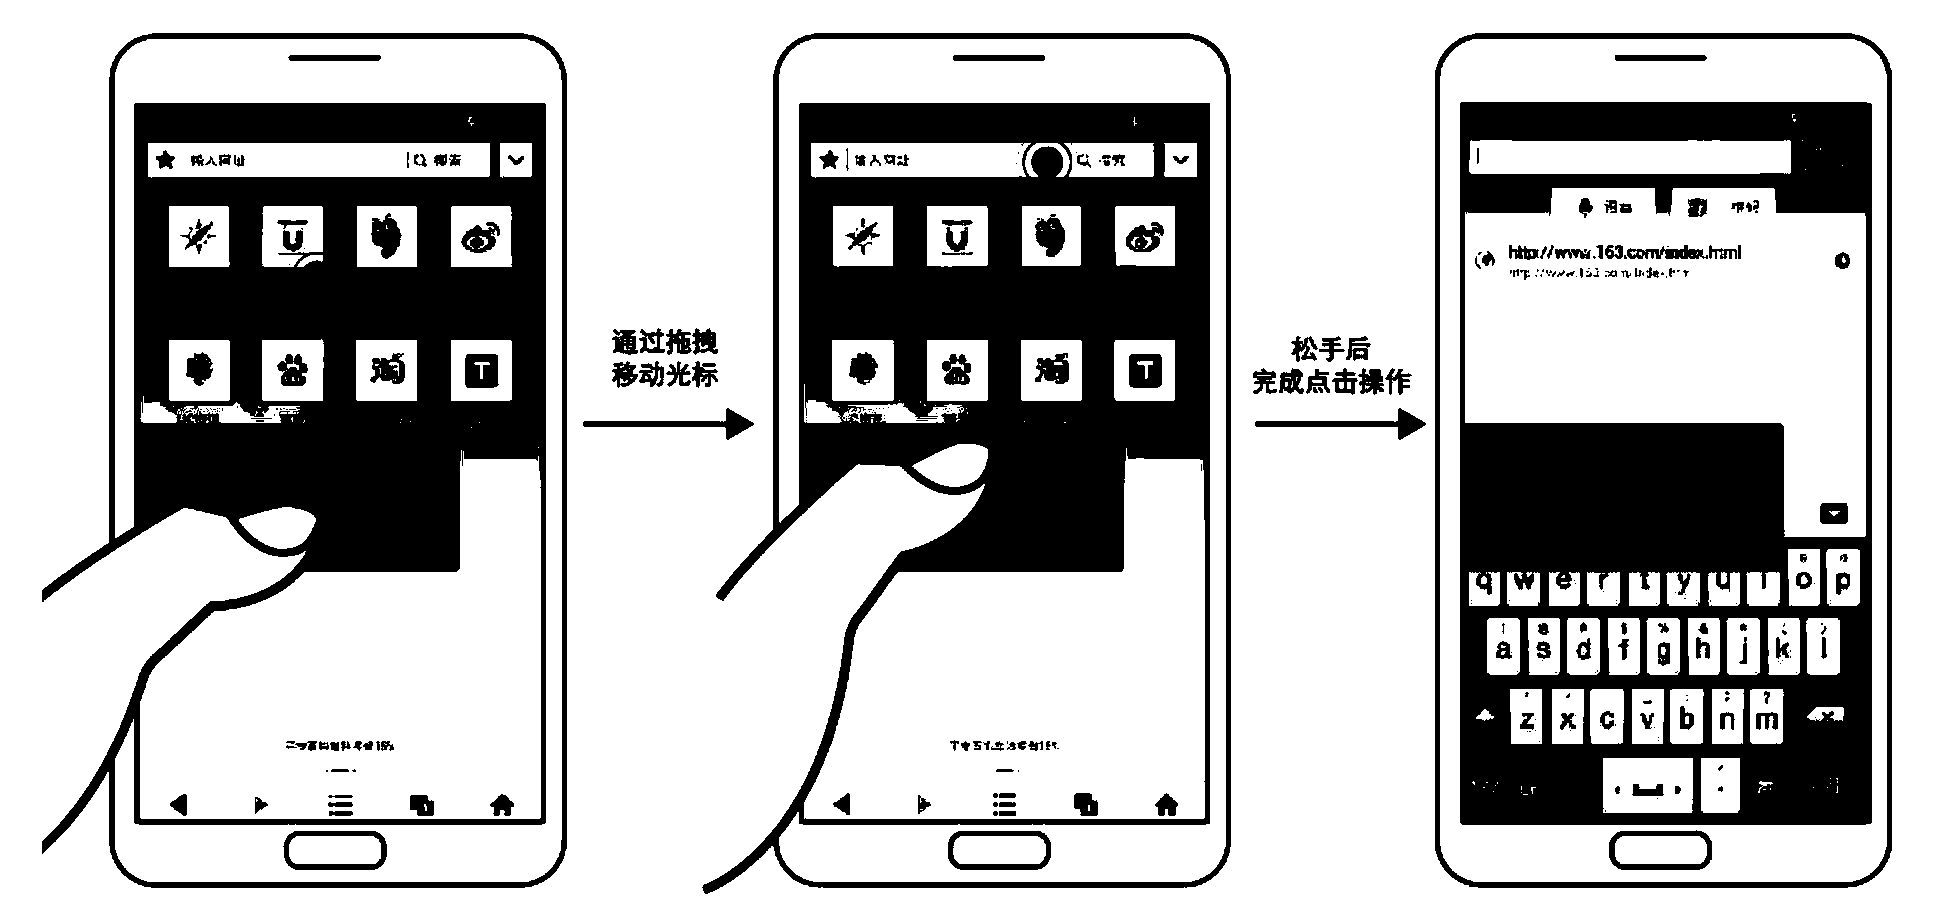 Touch operation method and device